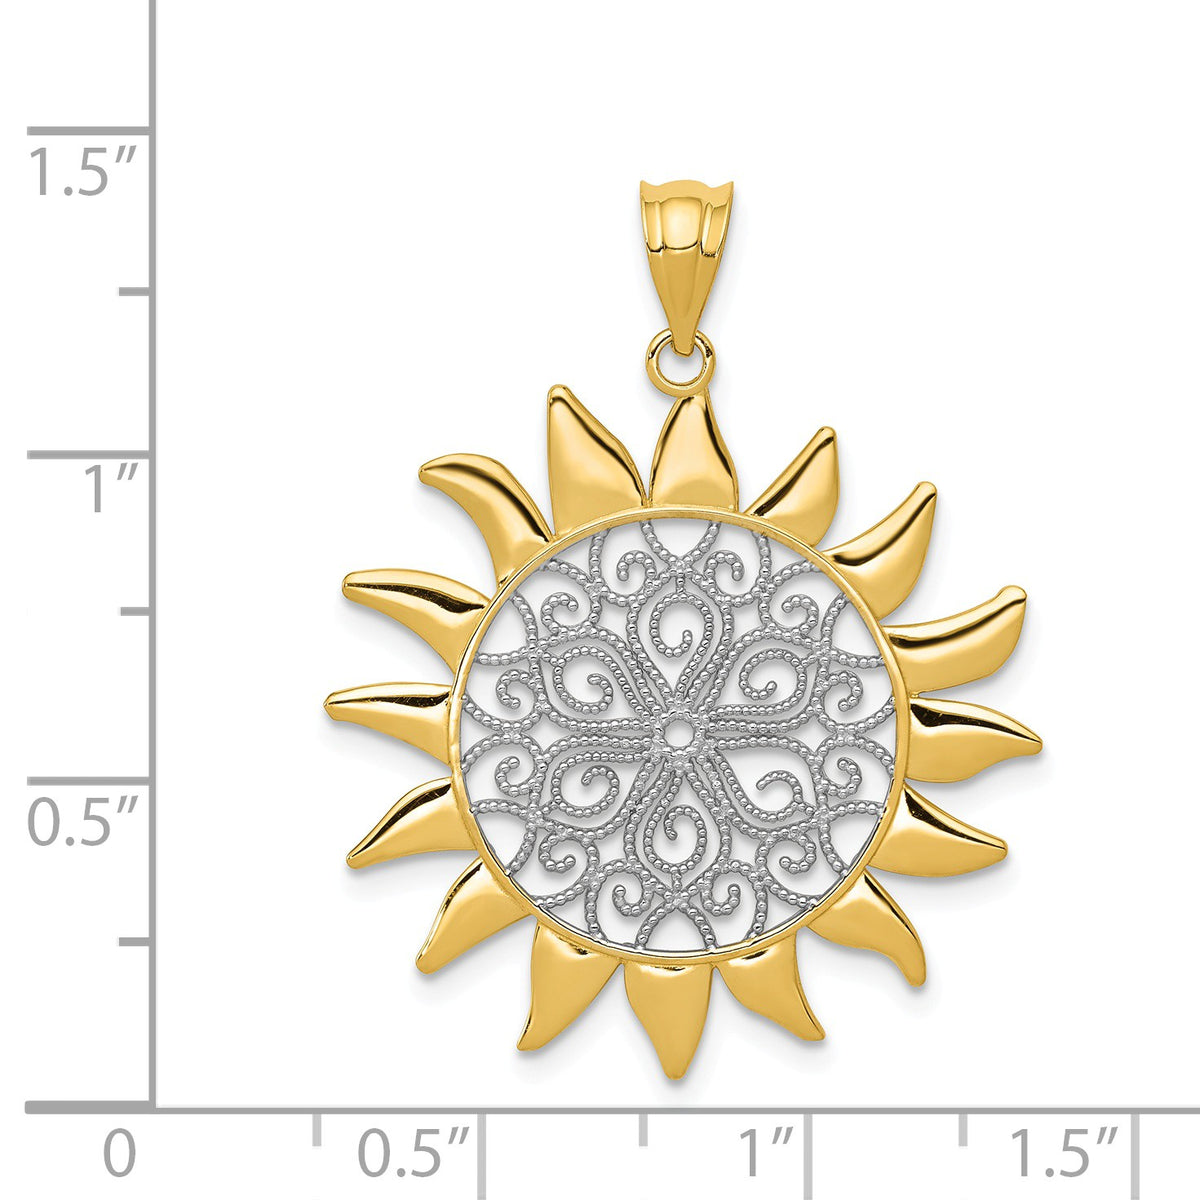 Alternate view of the 14k Yellow Gold &amp; White Rhodium 27mm Filigree Sun Pendant by The Black Bow Jewelry Co.